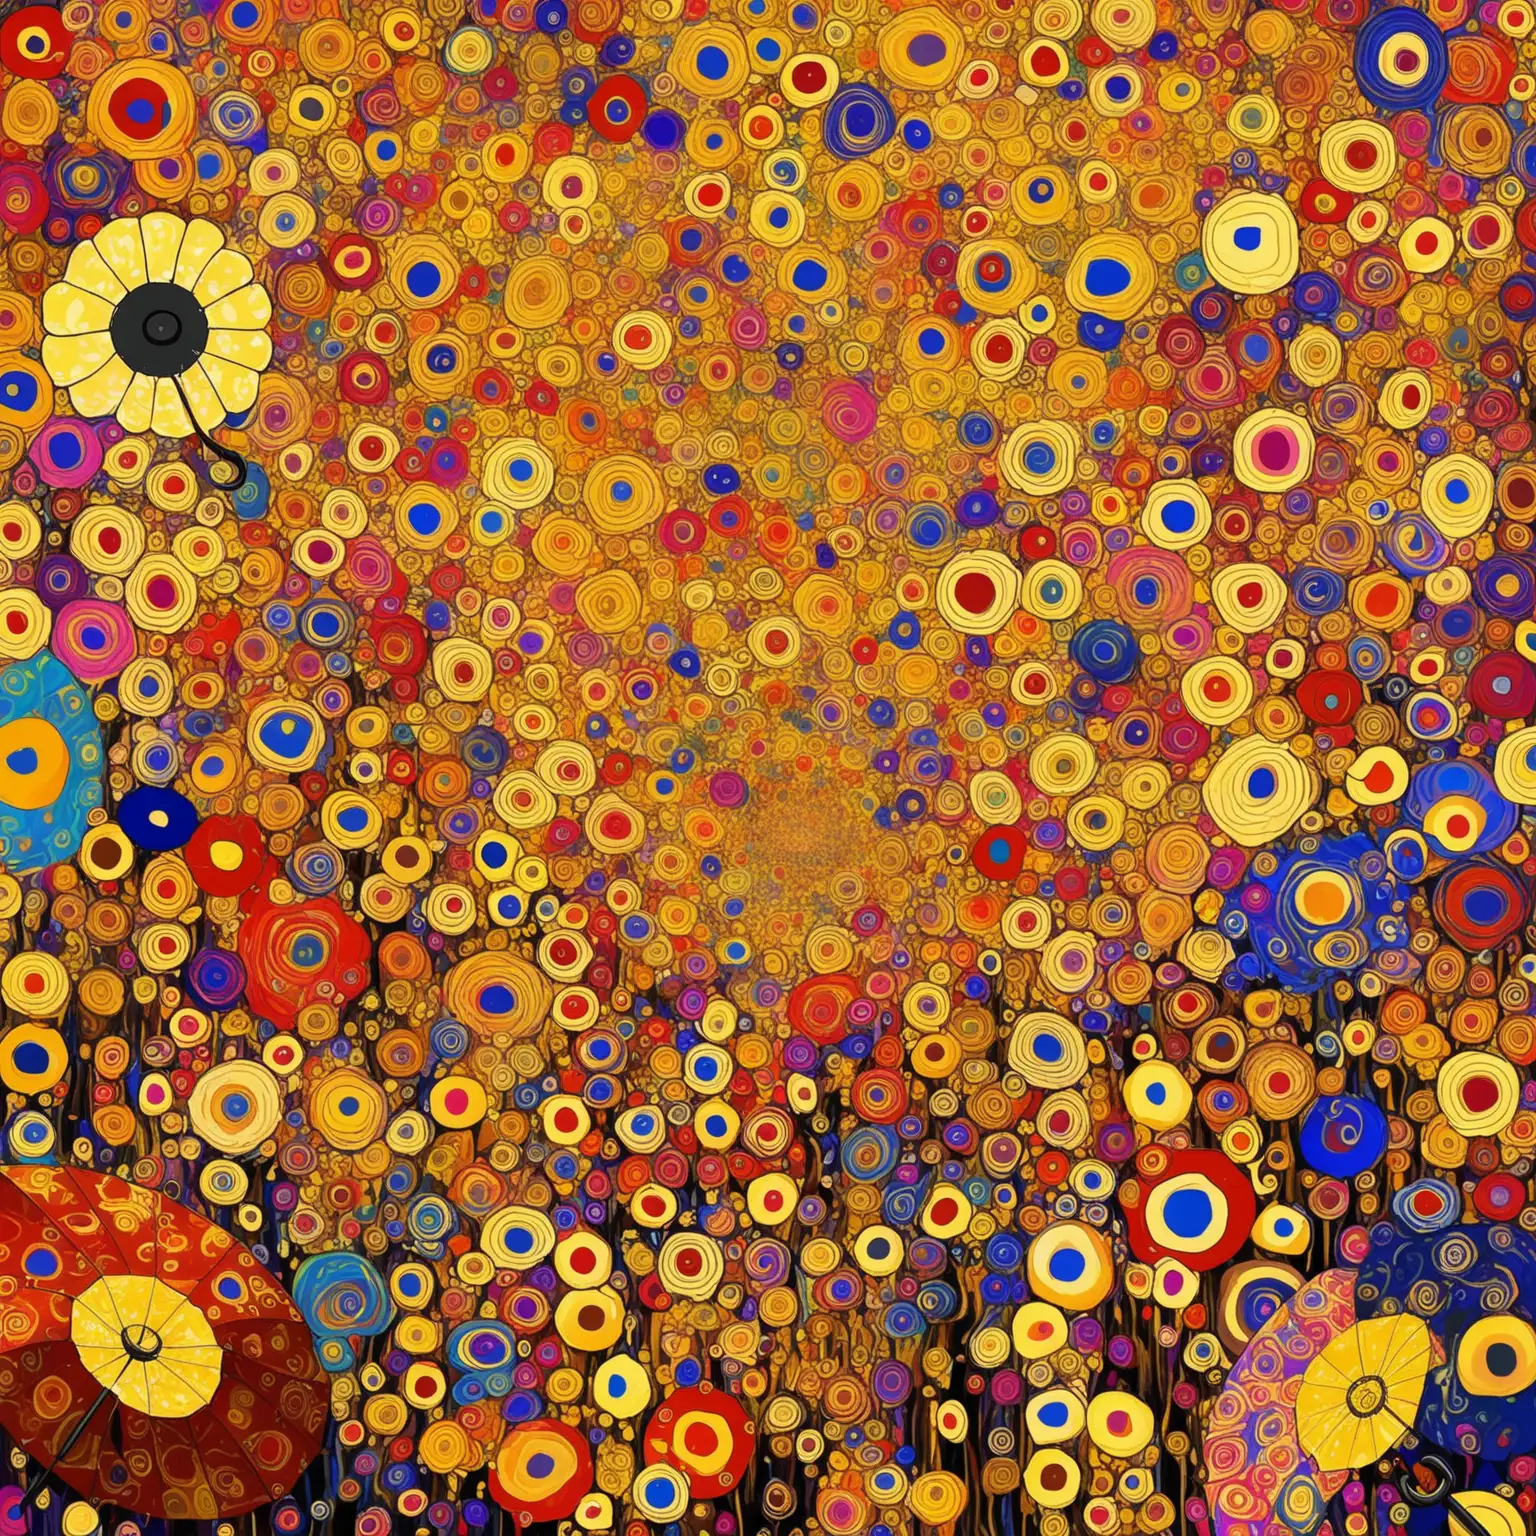 BACKGROUND IN STYLE OF KUSTAZ KLIMT AND JACKSON POLLOCK PSYCHEDELIC, CRAZY BACKGROUND GOLD MESSY,     FLOWERS  SPIRAL SUMMER OF LOVE, MORE FLOWERS MORE FLOWERS , UMBRELLAS 

